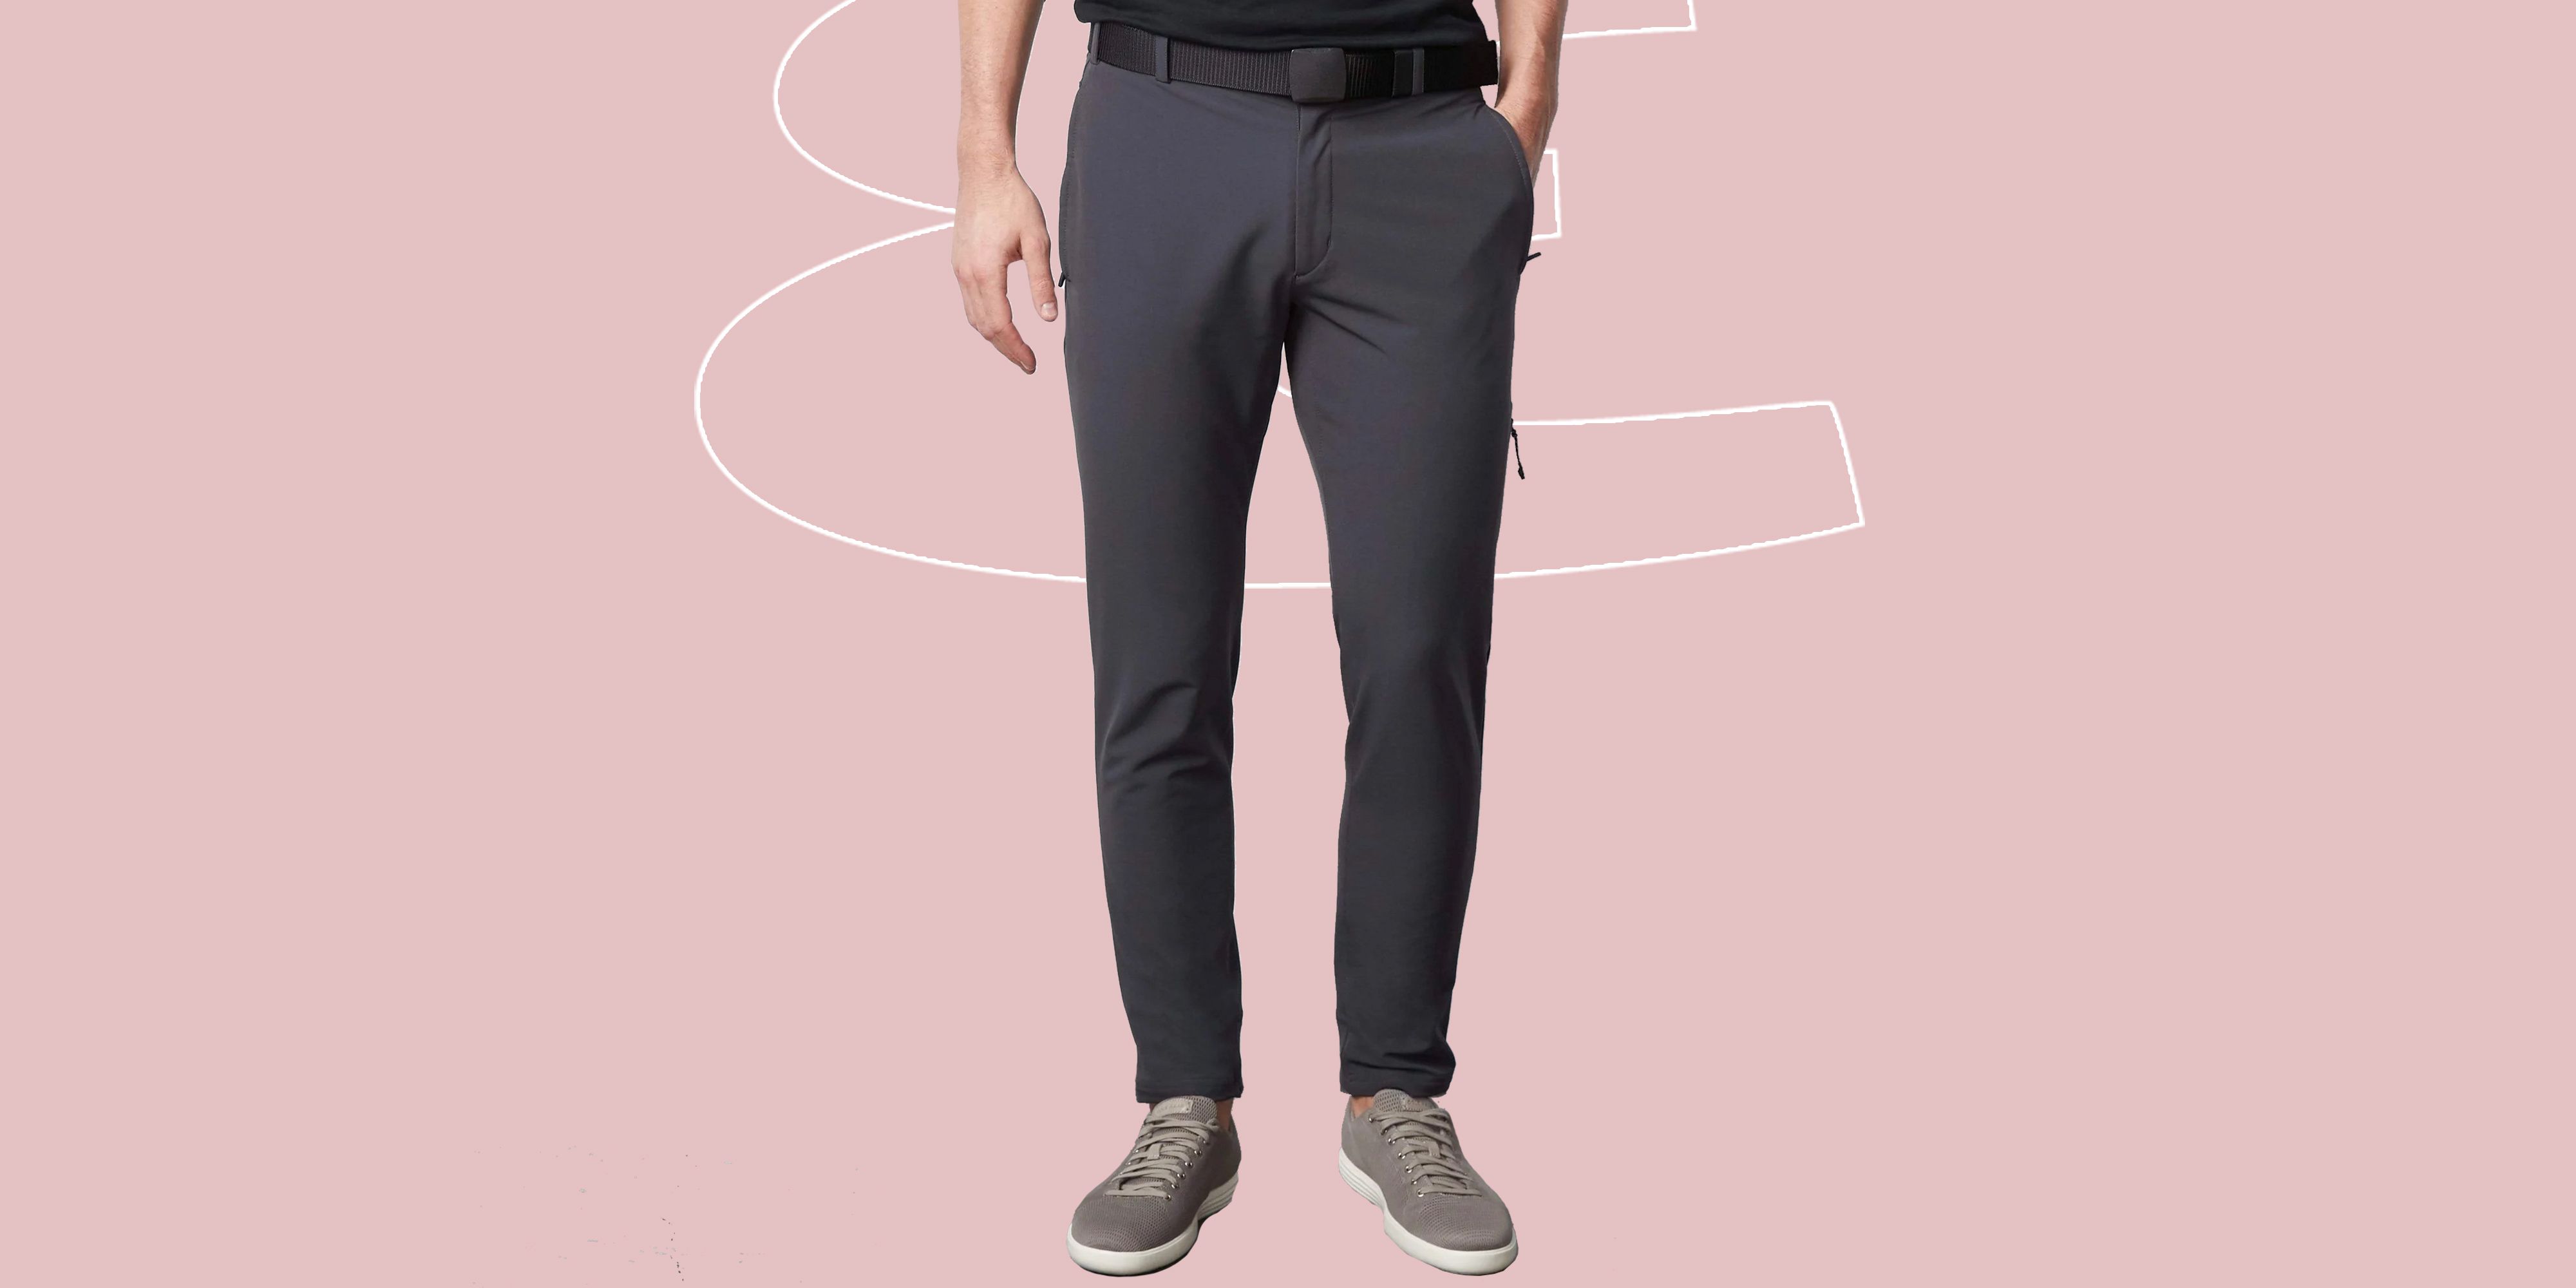 Aggregate more than 85 lightweight travel trousers best - in.duhocakina